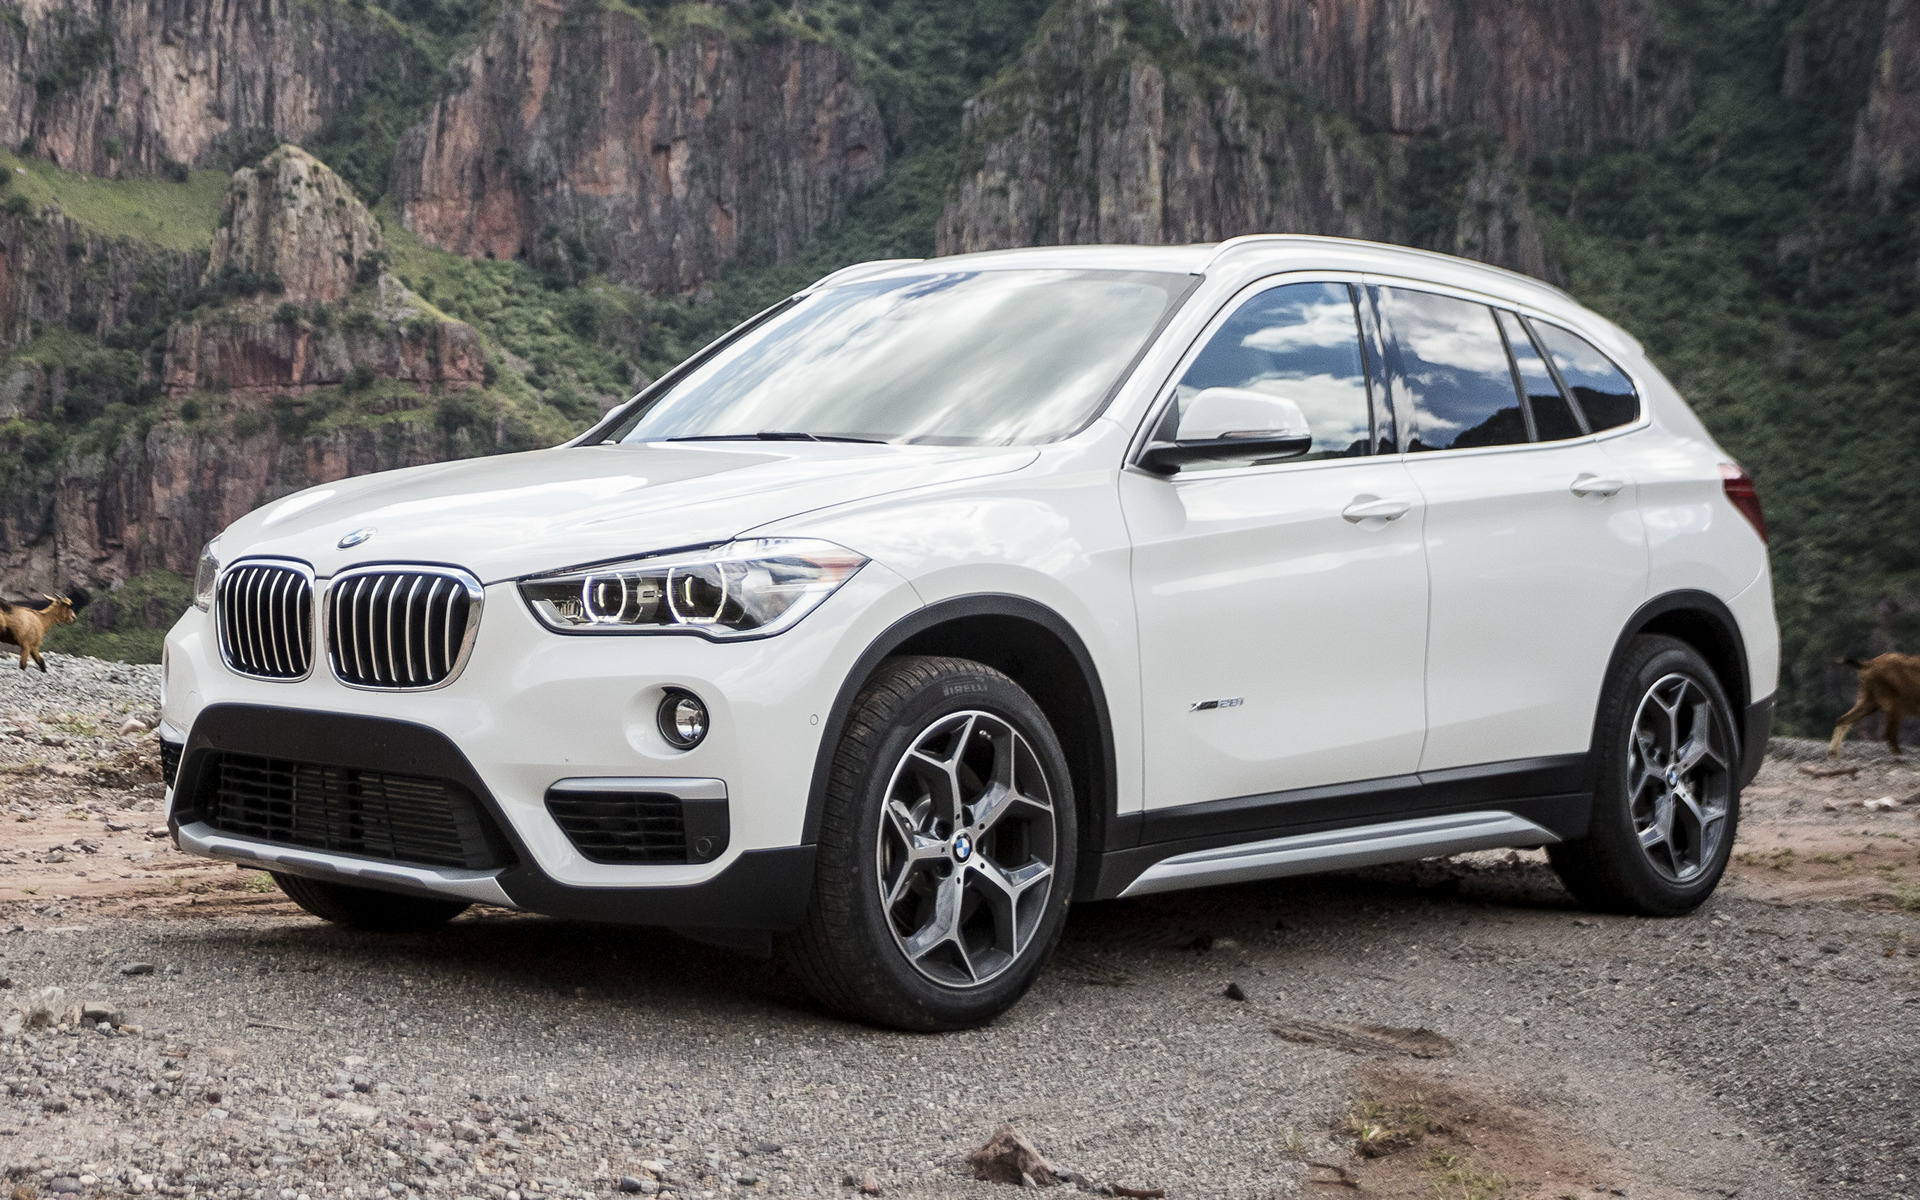 Bmw X1 - Bmw X1 Small Suv , HD Wallpaper & Backgrounds